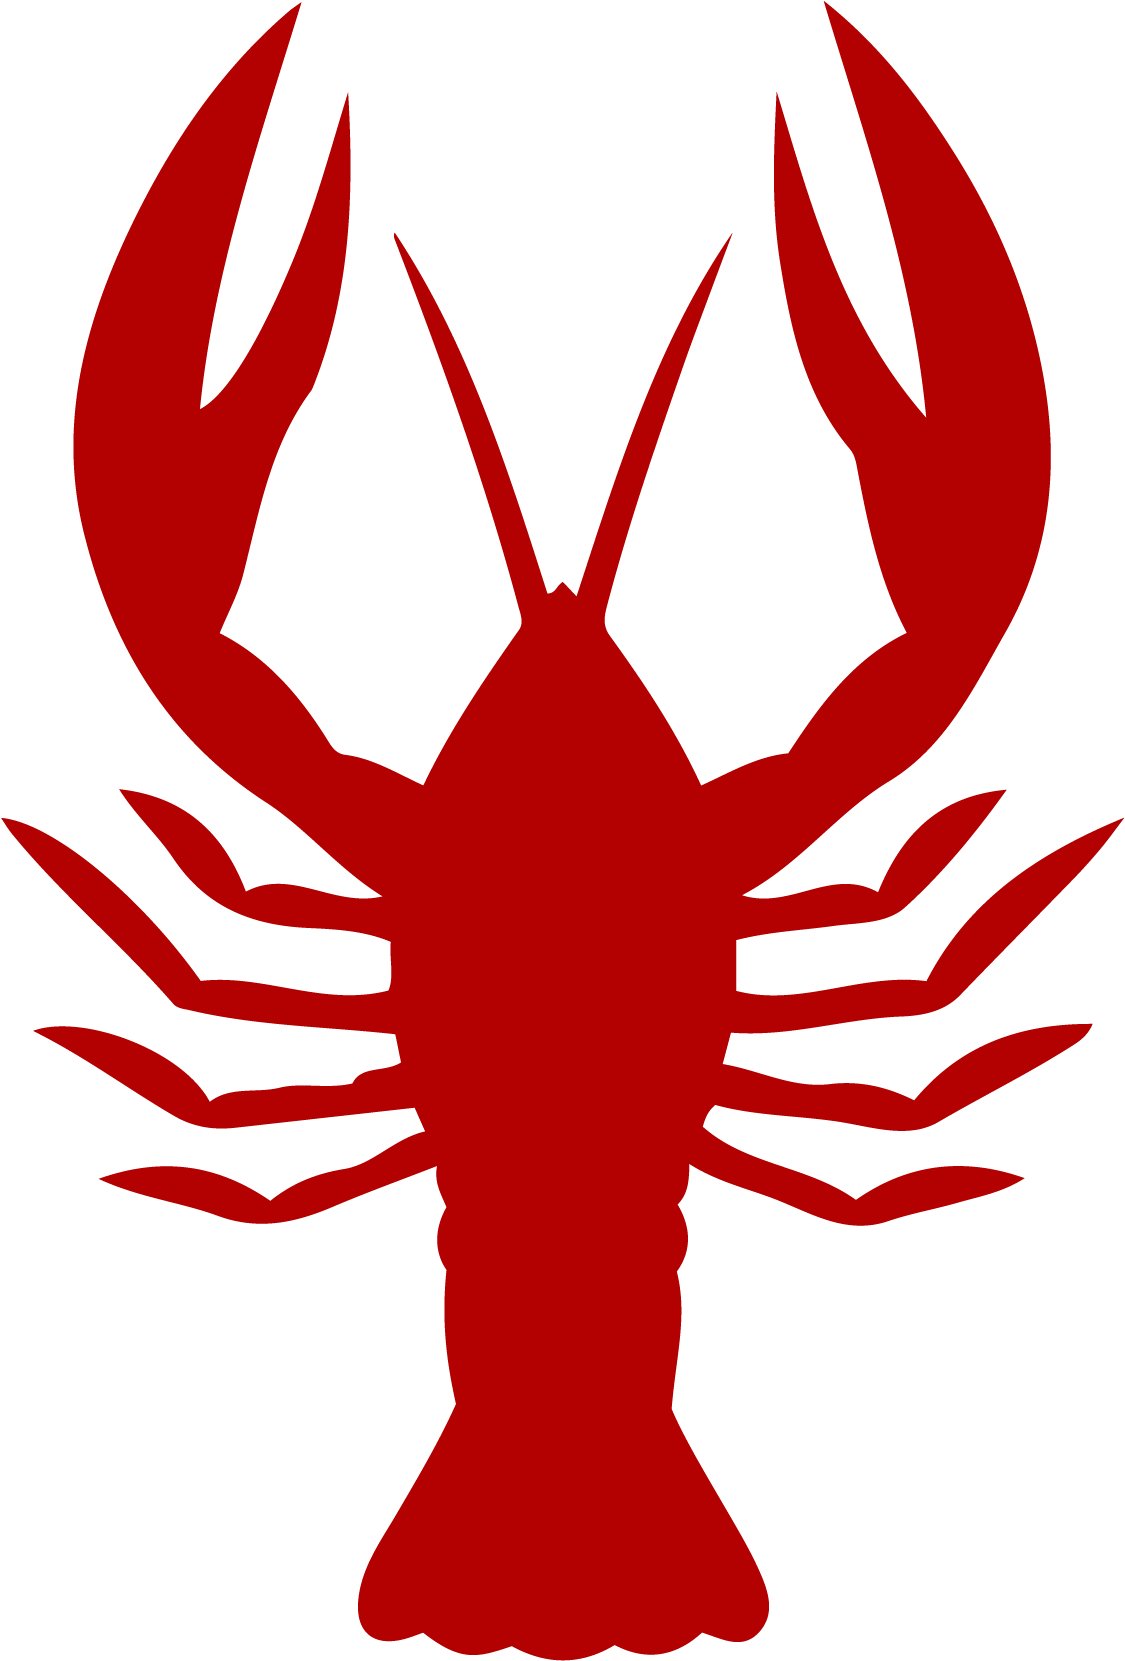 Red Crayfish Silhouette Graphic PNG